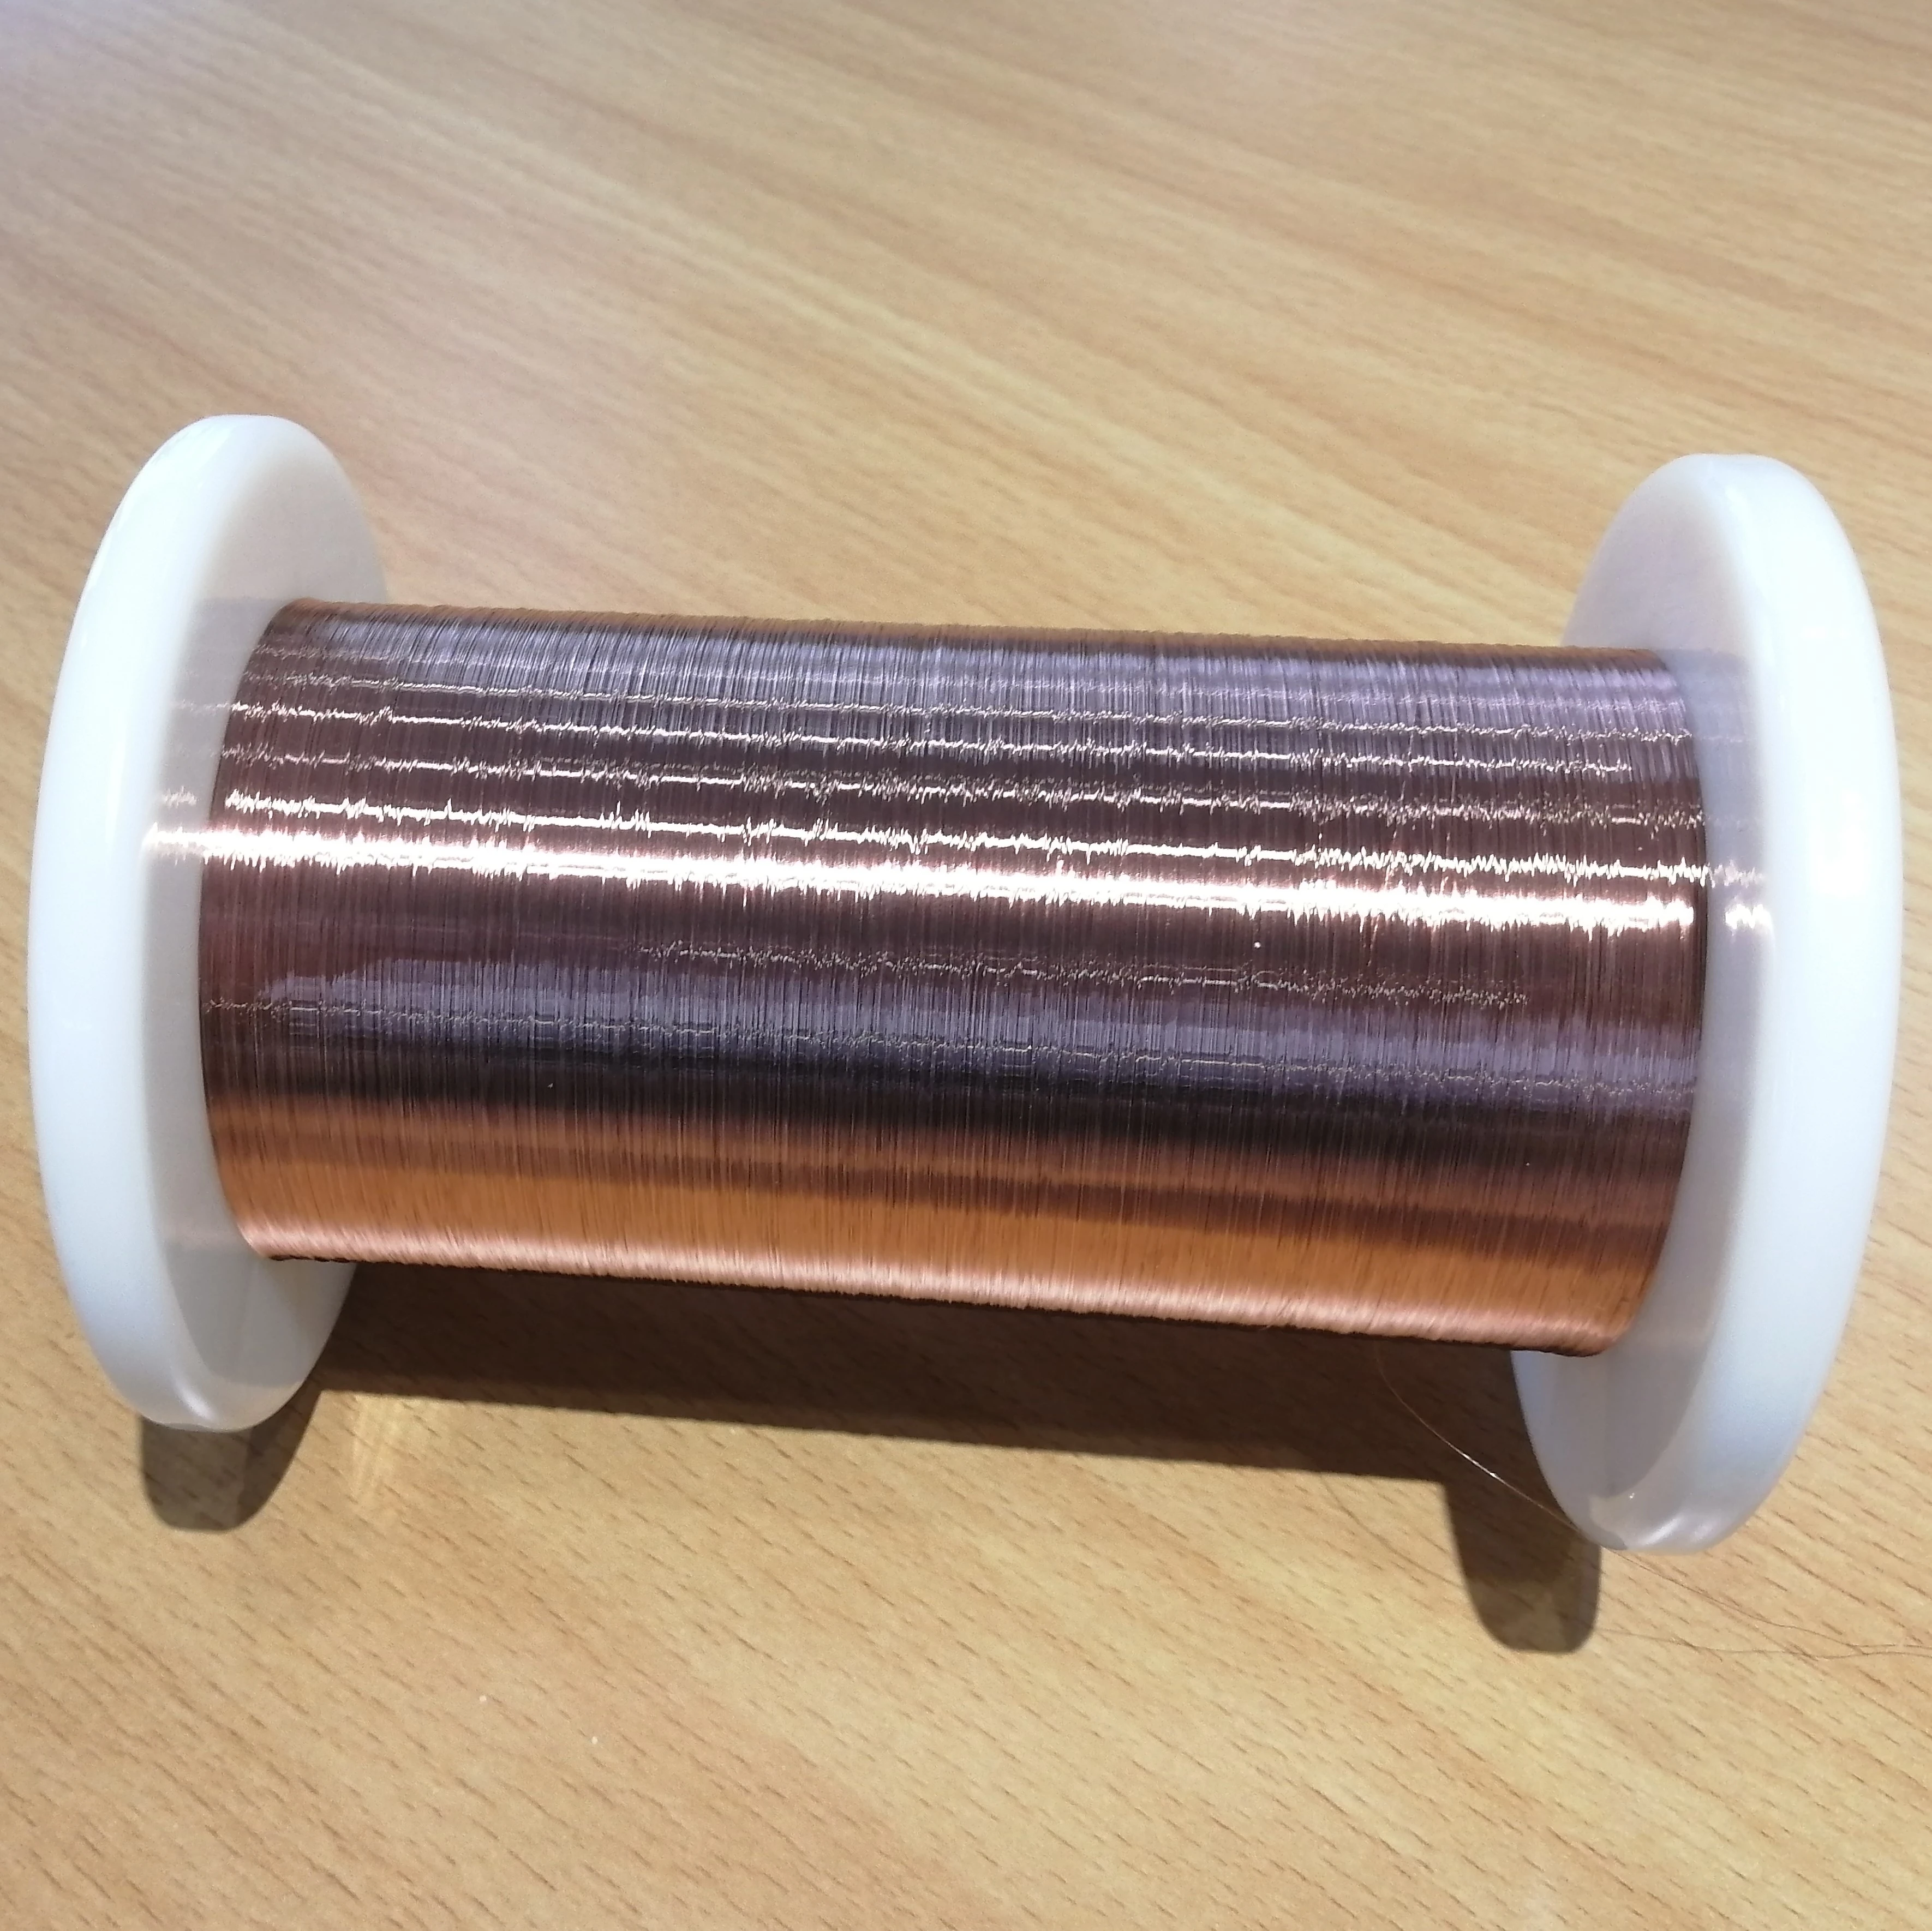 Ultra-fine enameled wires 0.27mm Polyesterimide enameled round copper wires with self bonding layer.